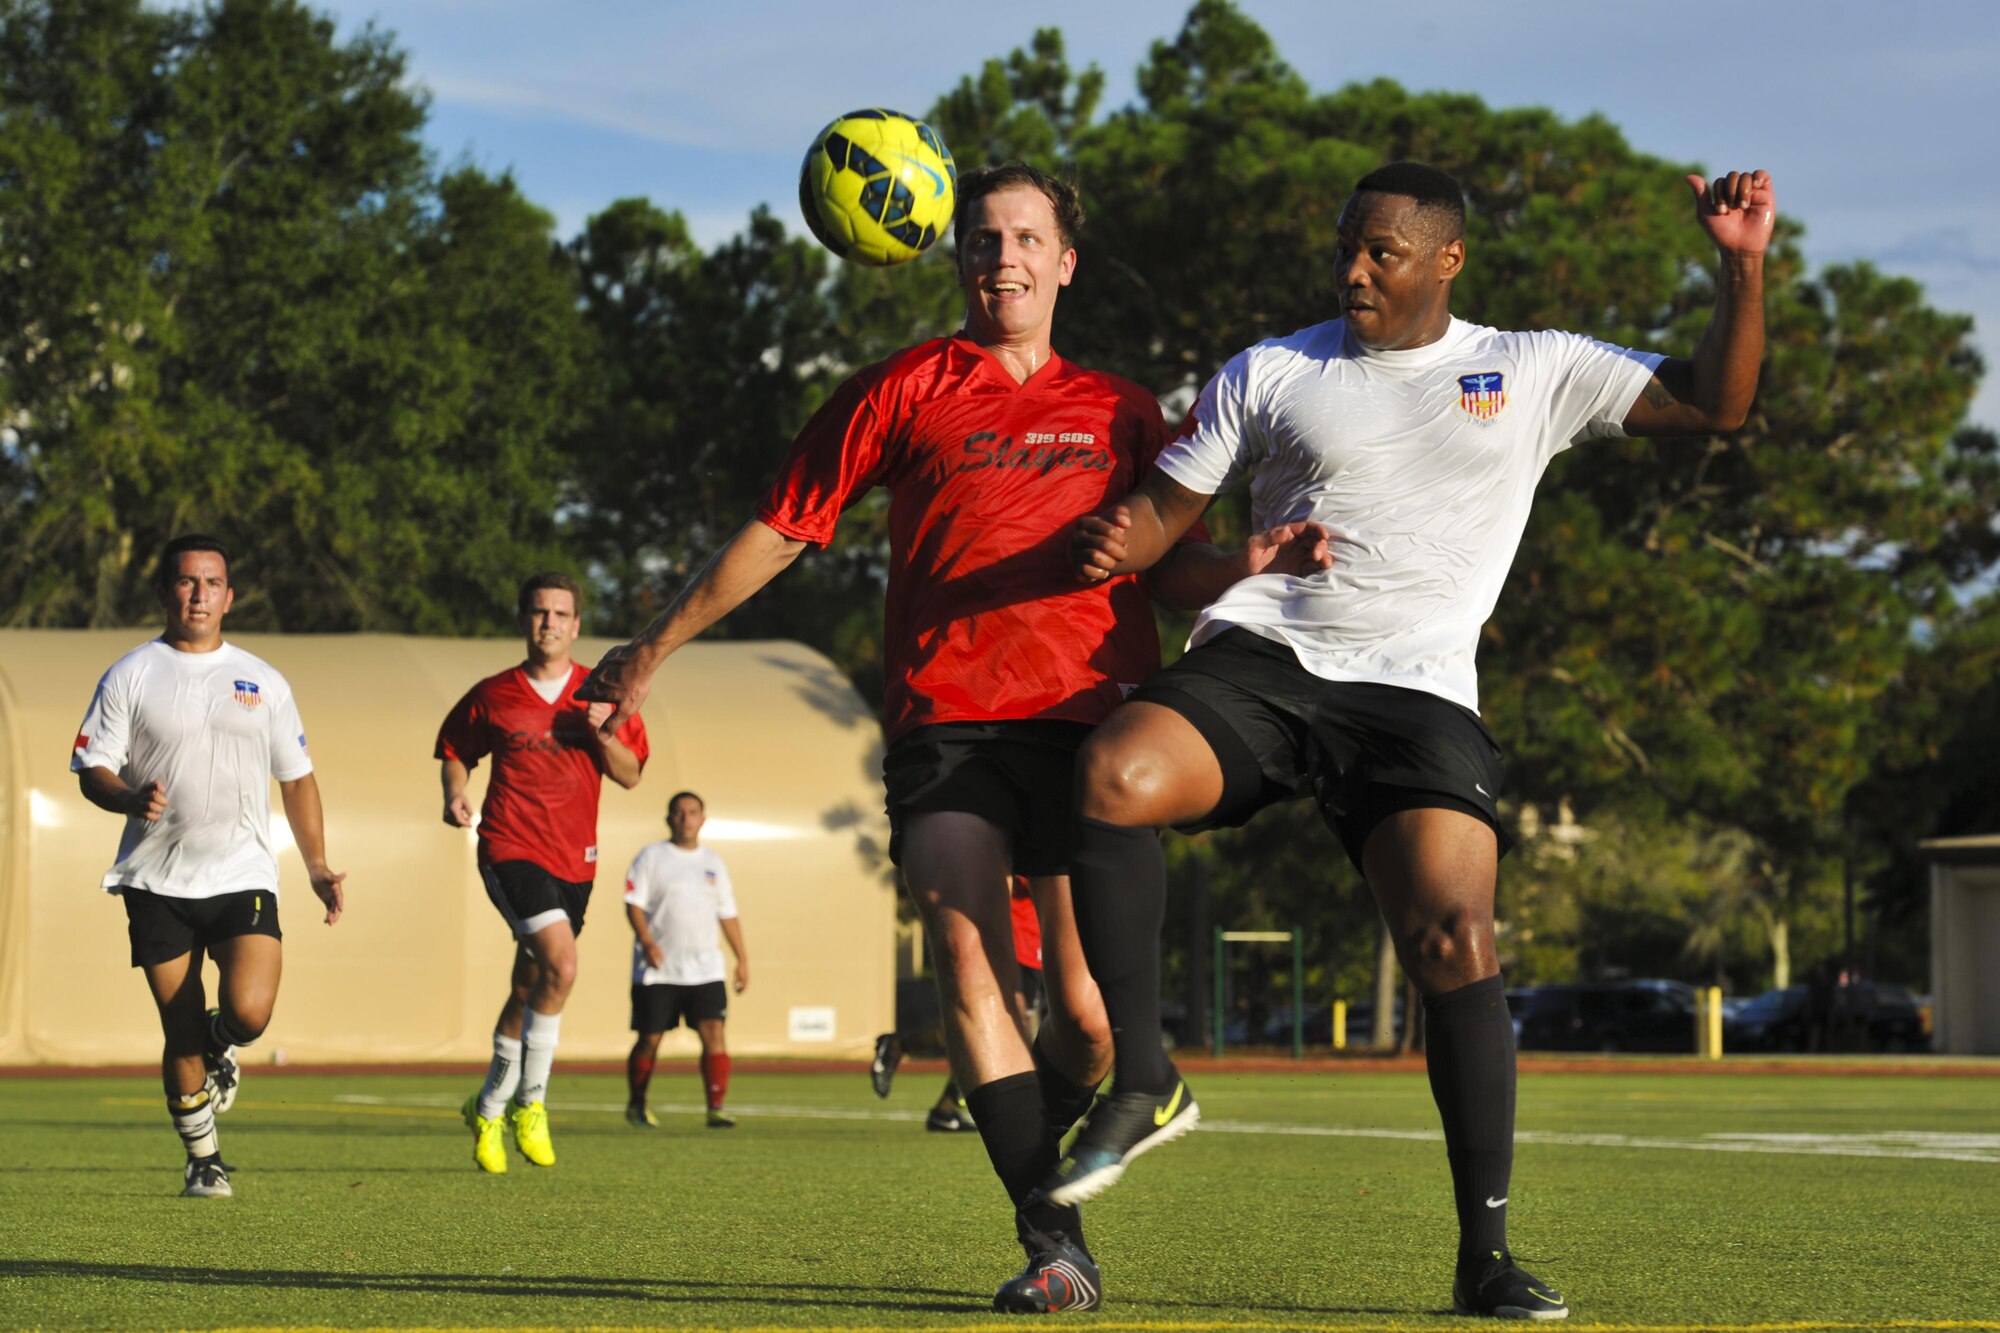 Members of 1st Special Operations Medical Group and the 319th Special Operations Squadron’s intramural soccer teams fight for the soccer ball at Hurlburt Field, Fla., Sept. 13, 2016. The 1st SOMDG won the 2016 Intramural Soccer Championship after a double-elimination match-up. (U.S. Air Force photo by Airman Dennis Spain)
